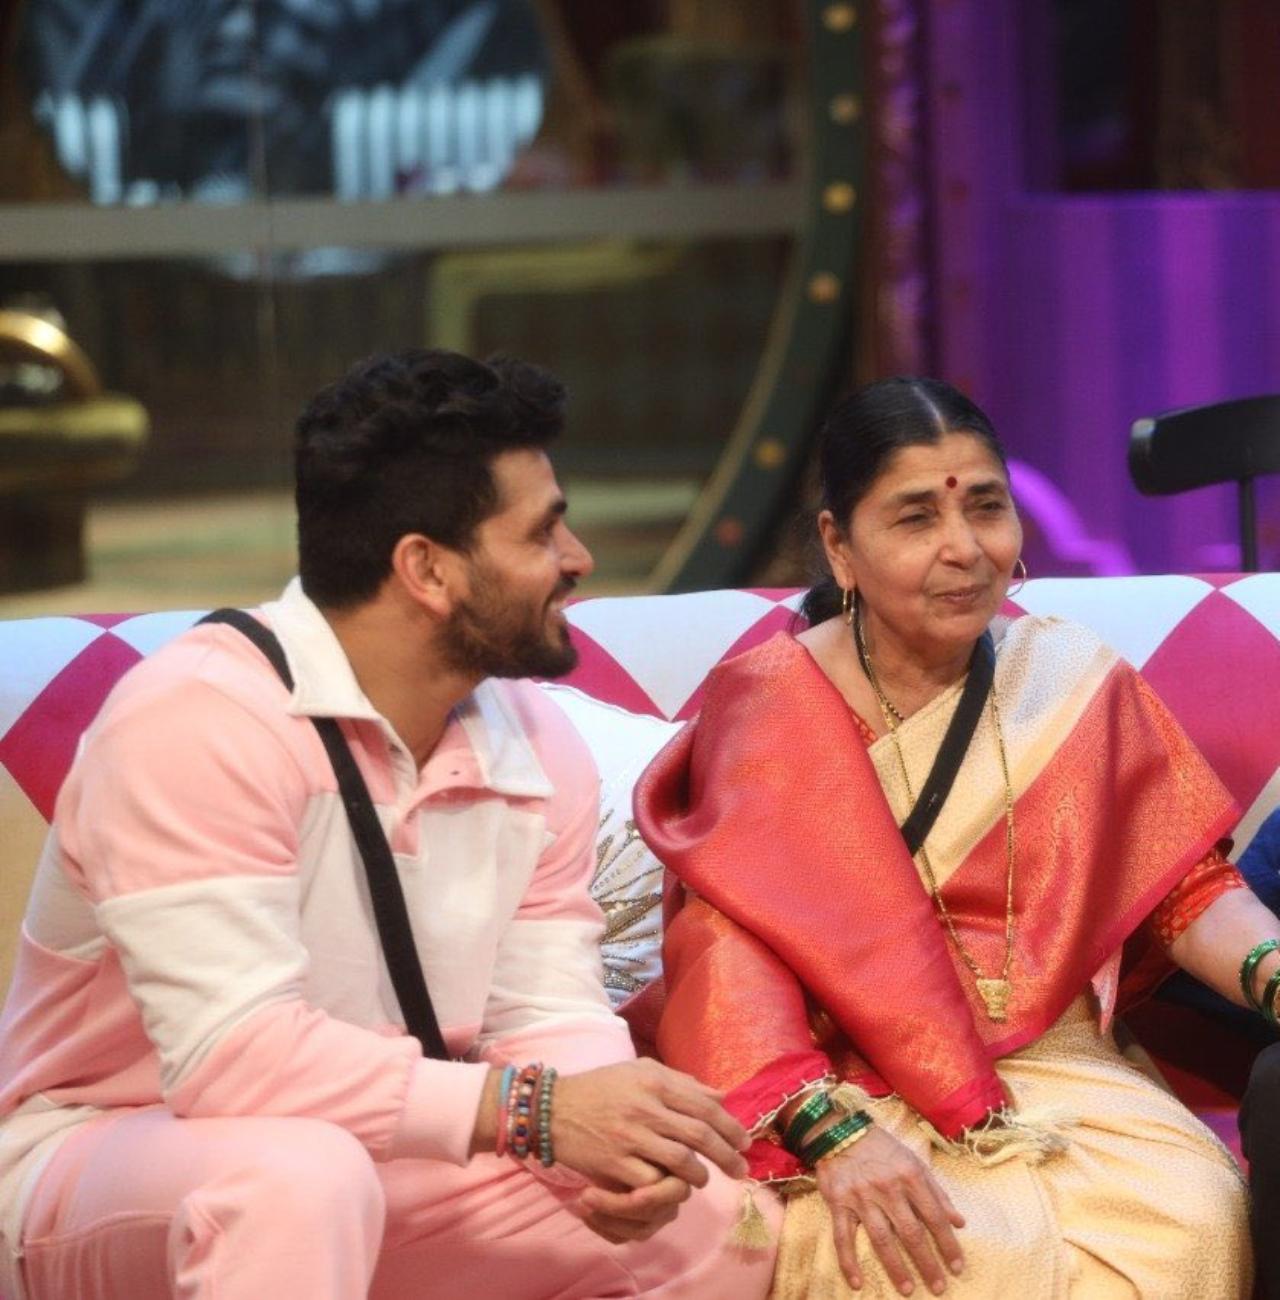 Salman Khan makes Shiv's mother comfortableIn Bigg Boss season 16, when Shiv Thakare's mother entered the house it was indeed an emotional moment for the contestant to have his mother in the house. As he also went on to break down in tears to see his mother after a long time, Salman khan stepped up to comfort his mother and make her feel good